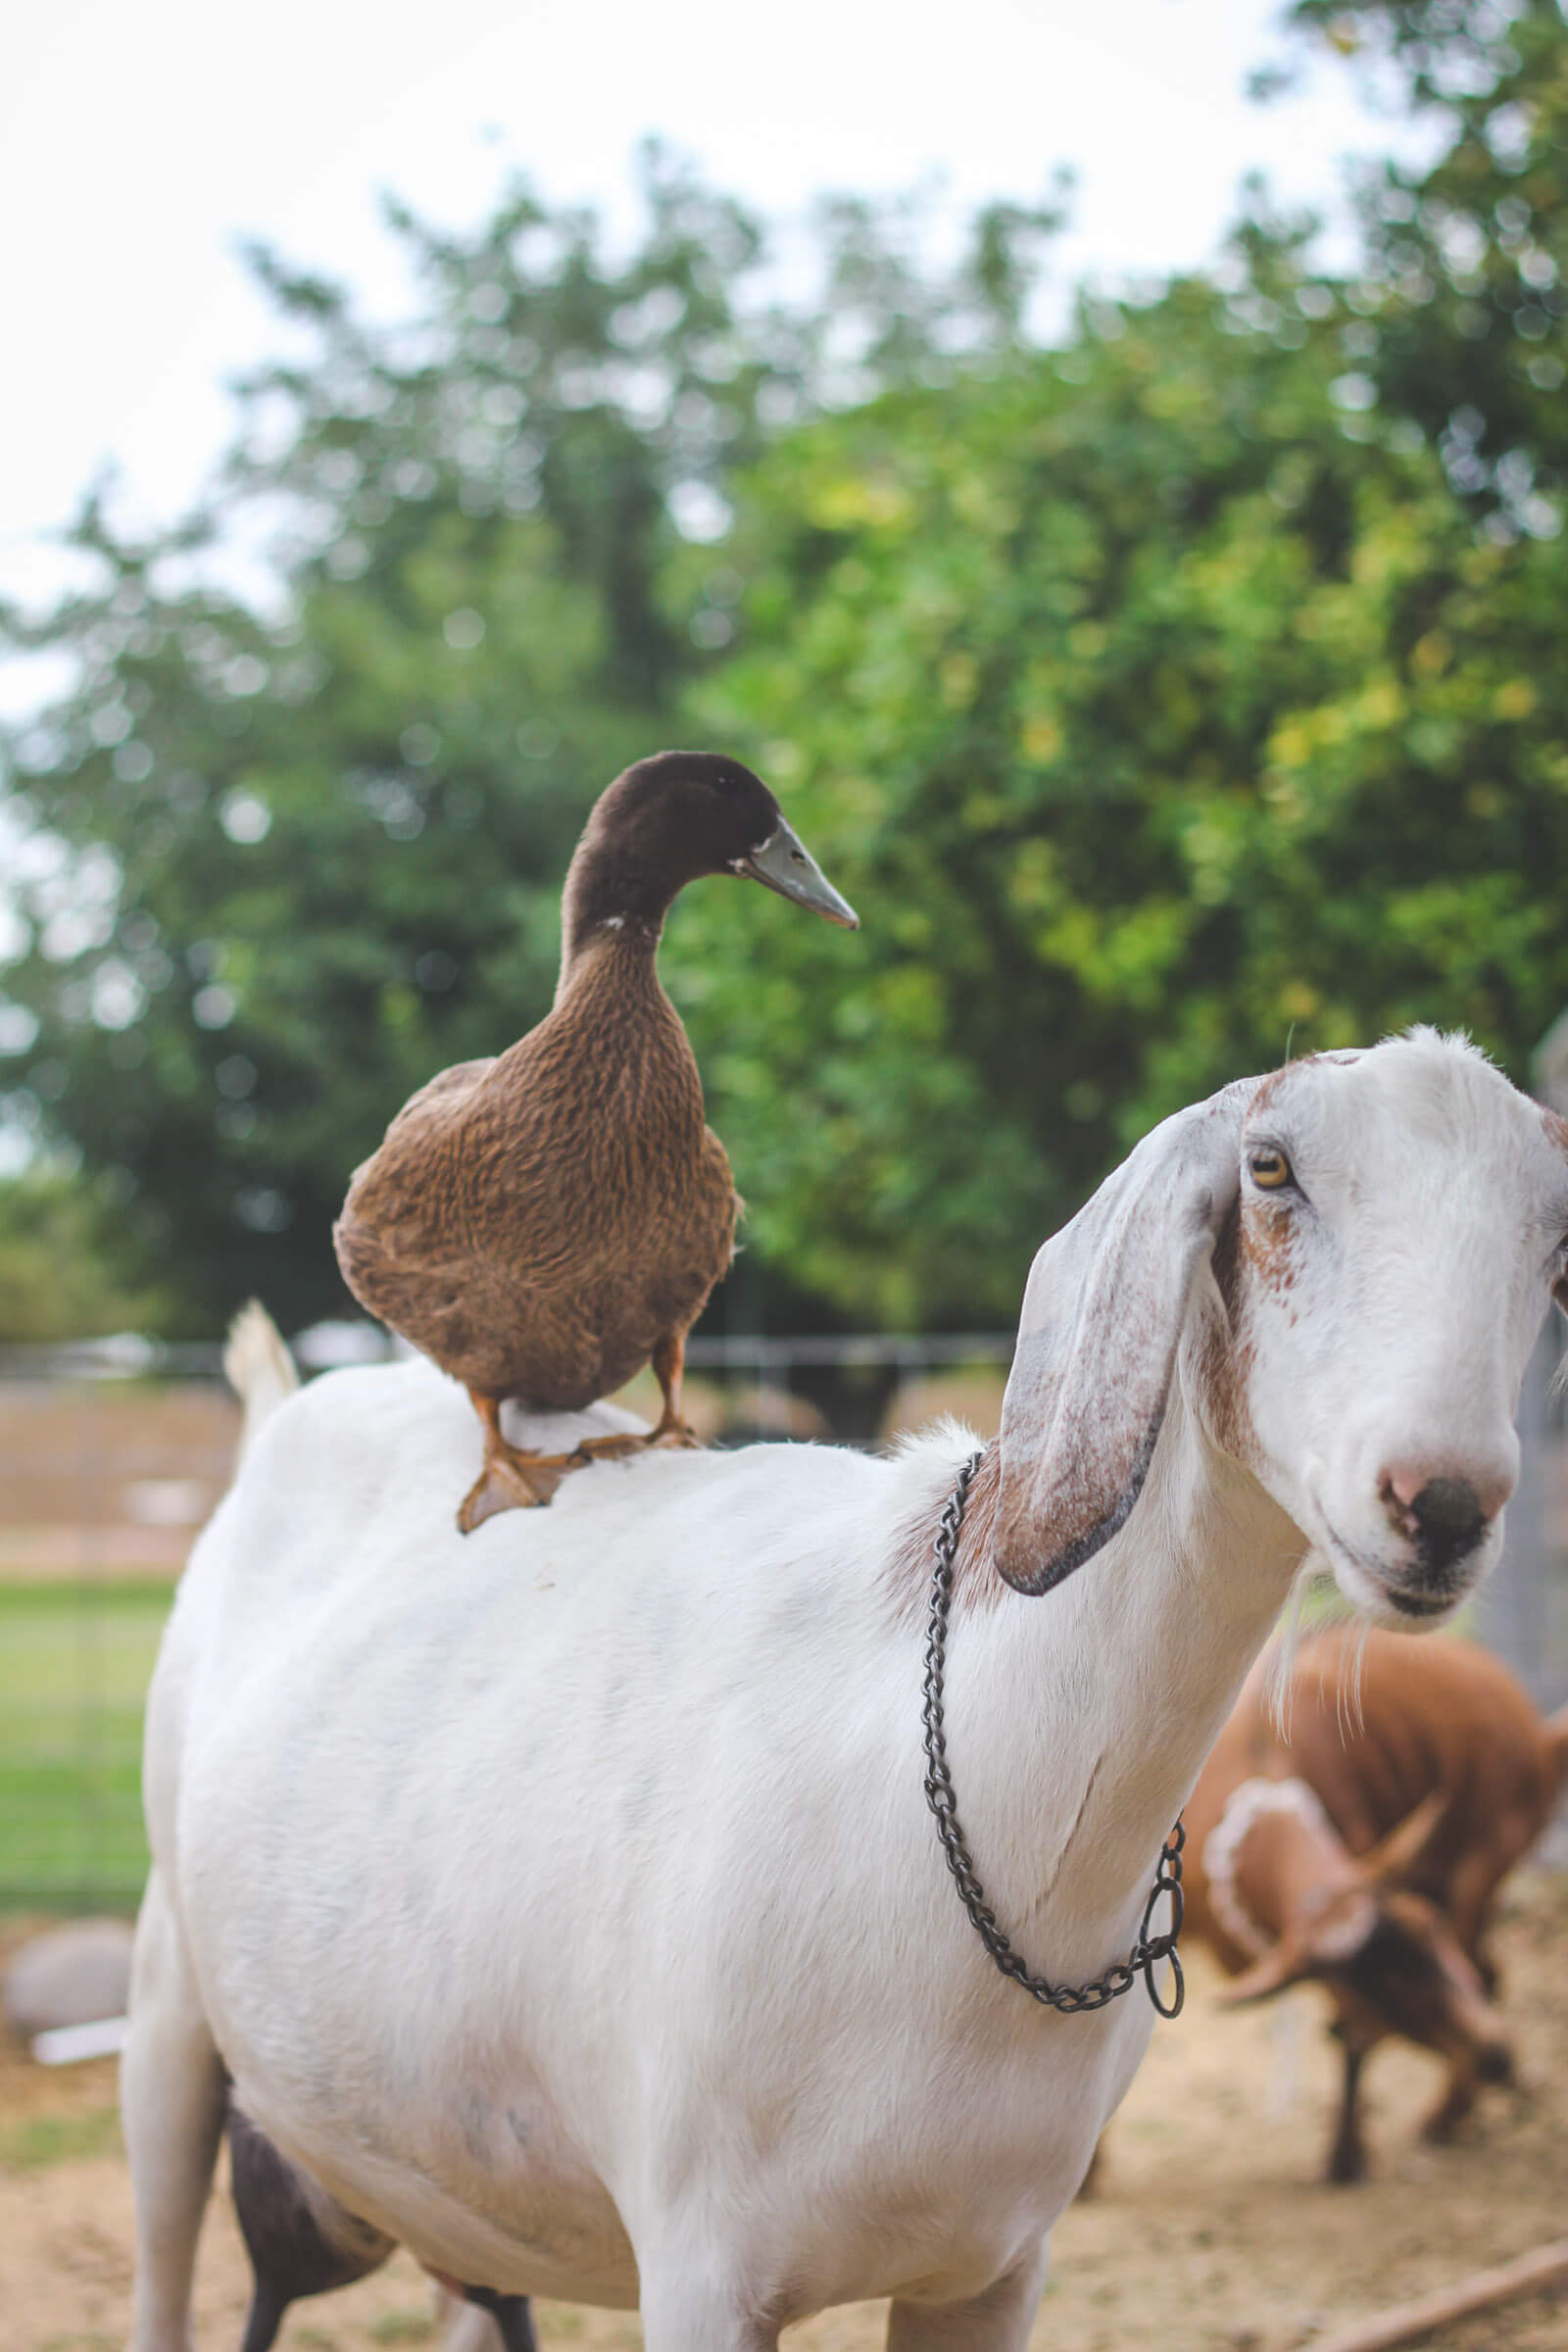 How Much Does a Goat Cost - Duck on a Goat